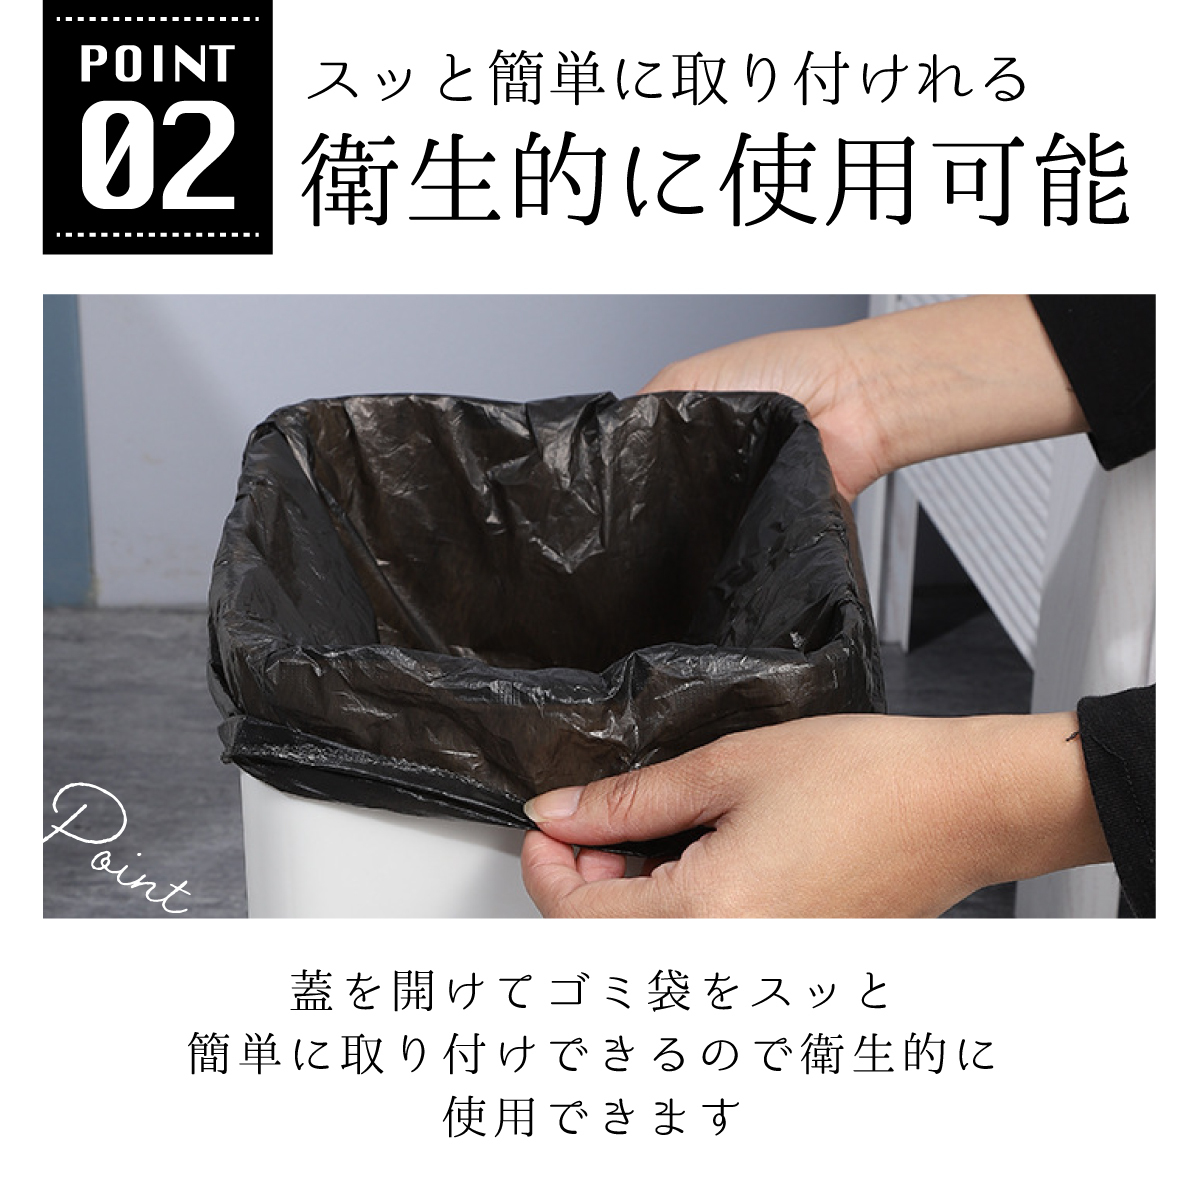  waste basket automatic opening and closing Homme tsu raw .. trash can deodorization automatic waste basket slim stylish sensor automatic opening and closing waste basket kitchen dumpster sanitary box automatic air-tigh ..